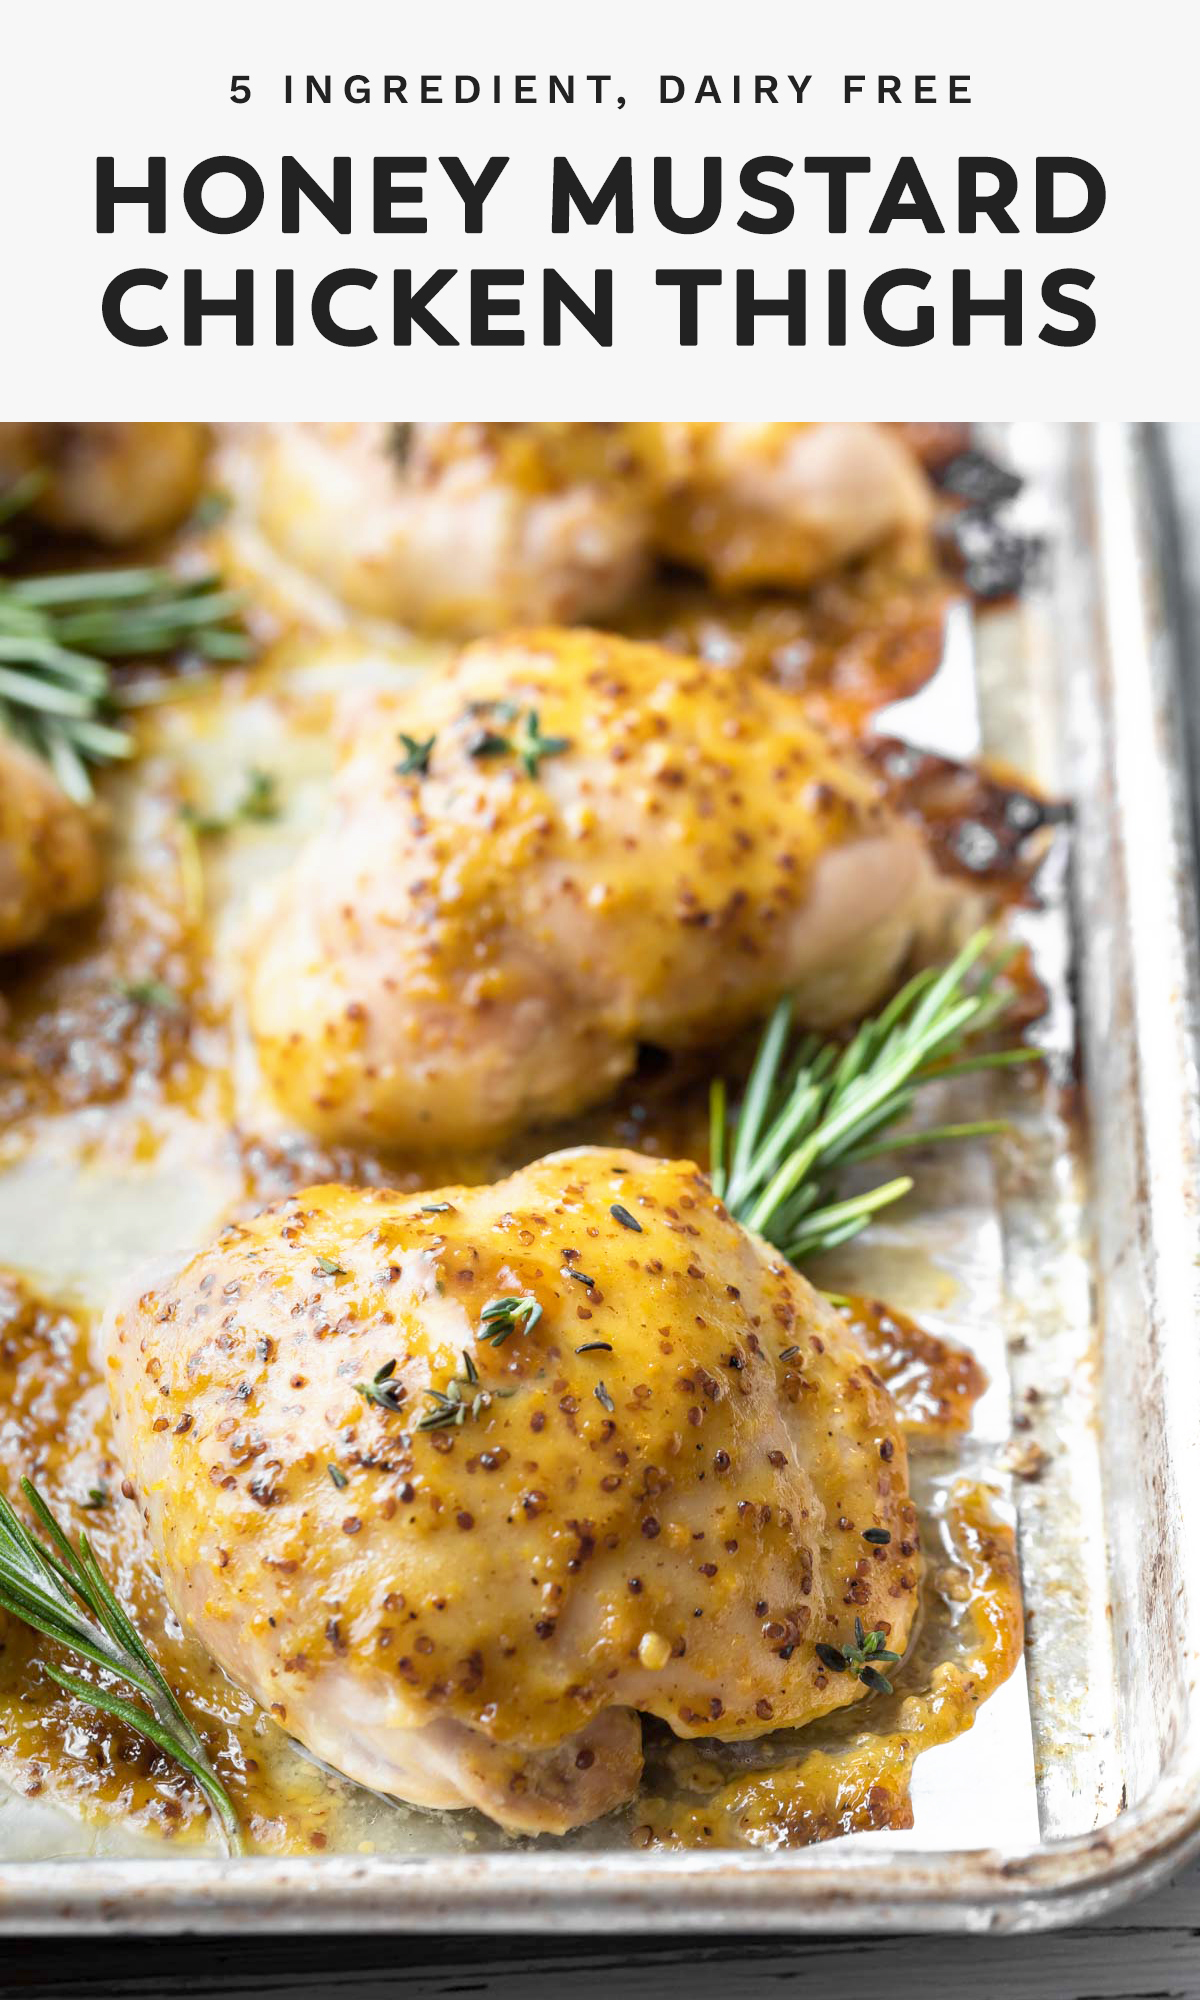 Baked Honey Mustard Chicken Thighs - Simply Whisked